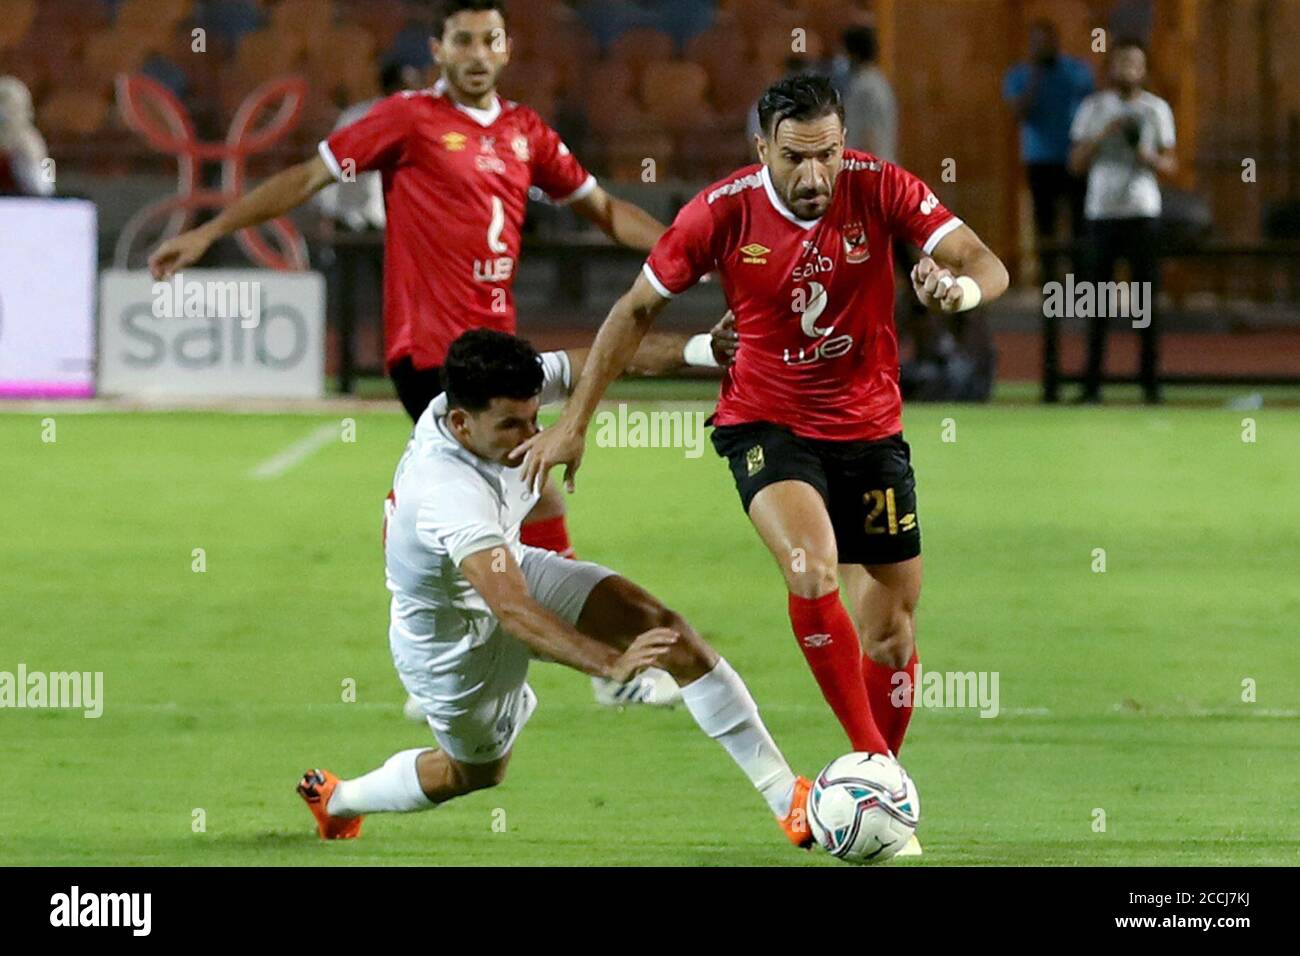 Cairo, Egypt. 22nd Aug, 2020. Ali Maaloul (R) of Al-Ahly competes during an Egyptian Premier League football match between Zamalek and Al-Ahly in Cairo, Egypt, Aug. 22, 2020. Credit: Ahmed Gomaa/Xinhua/Alamy Live News Stock Photo